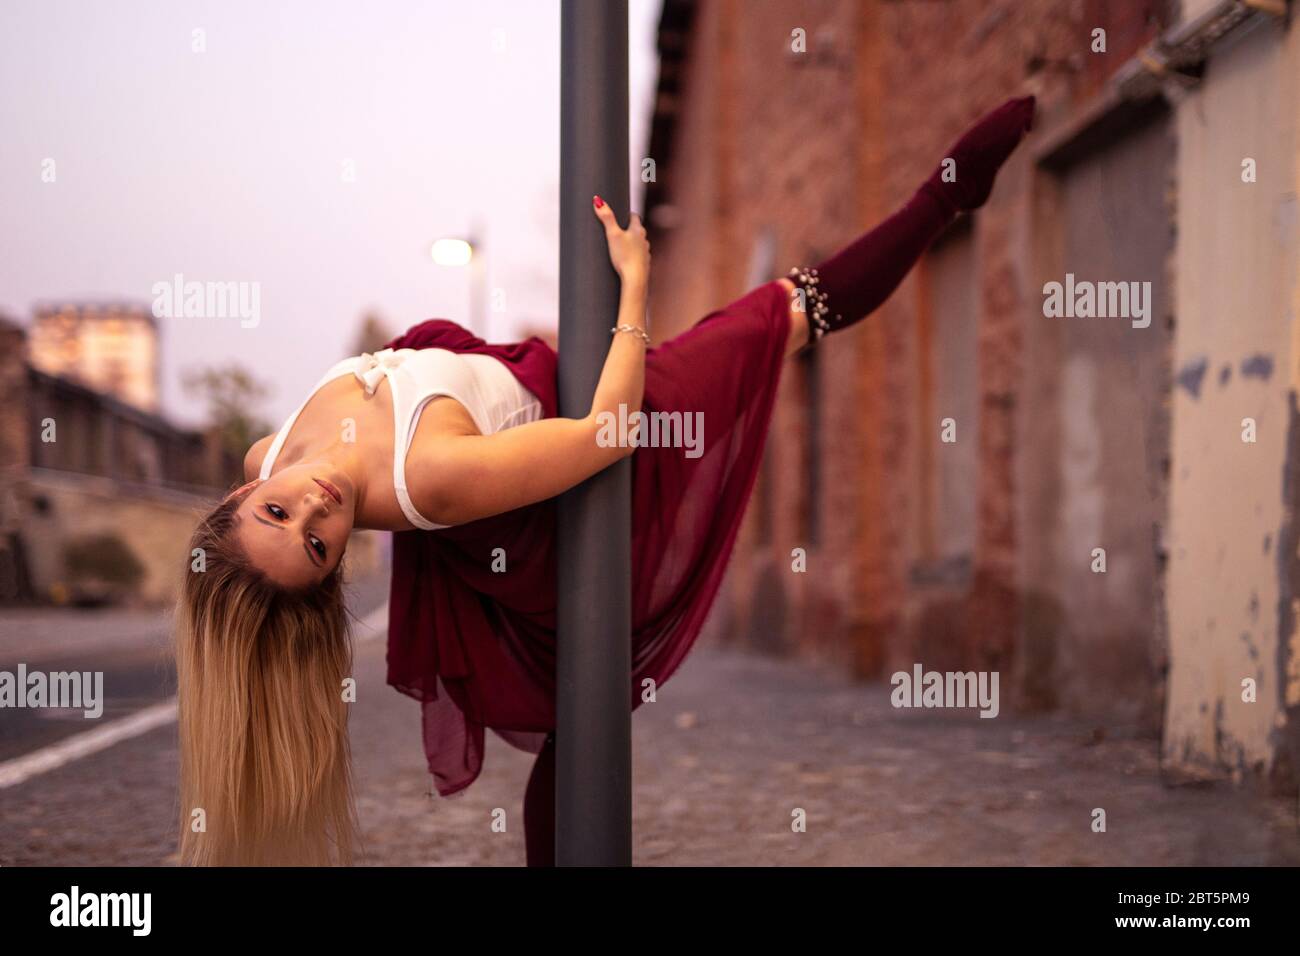 Beautriful athletic woman in body on street lamppost Stock Photo